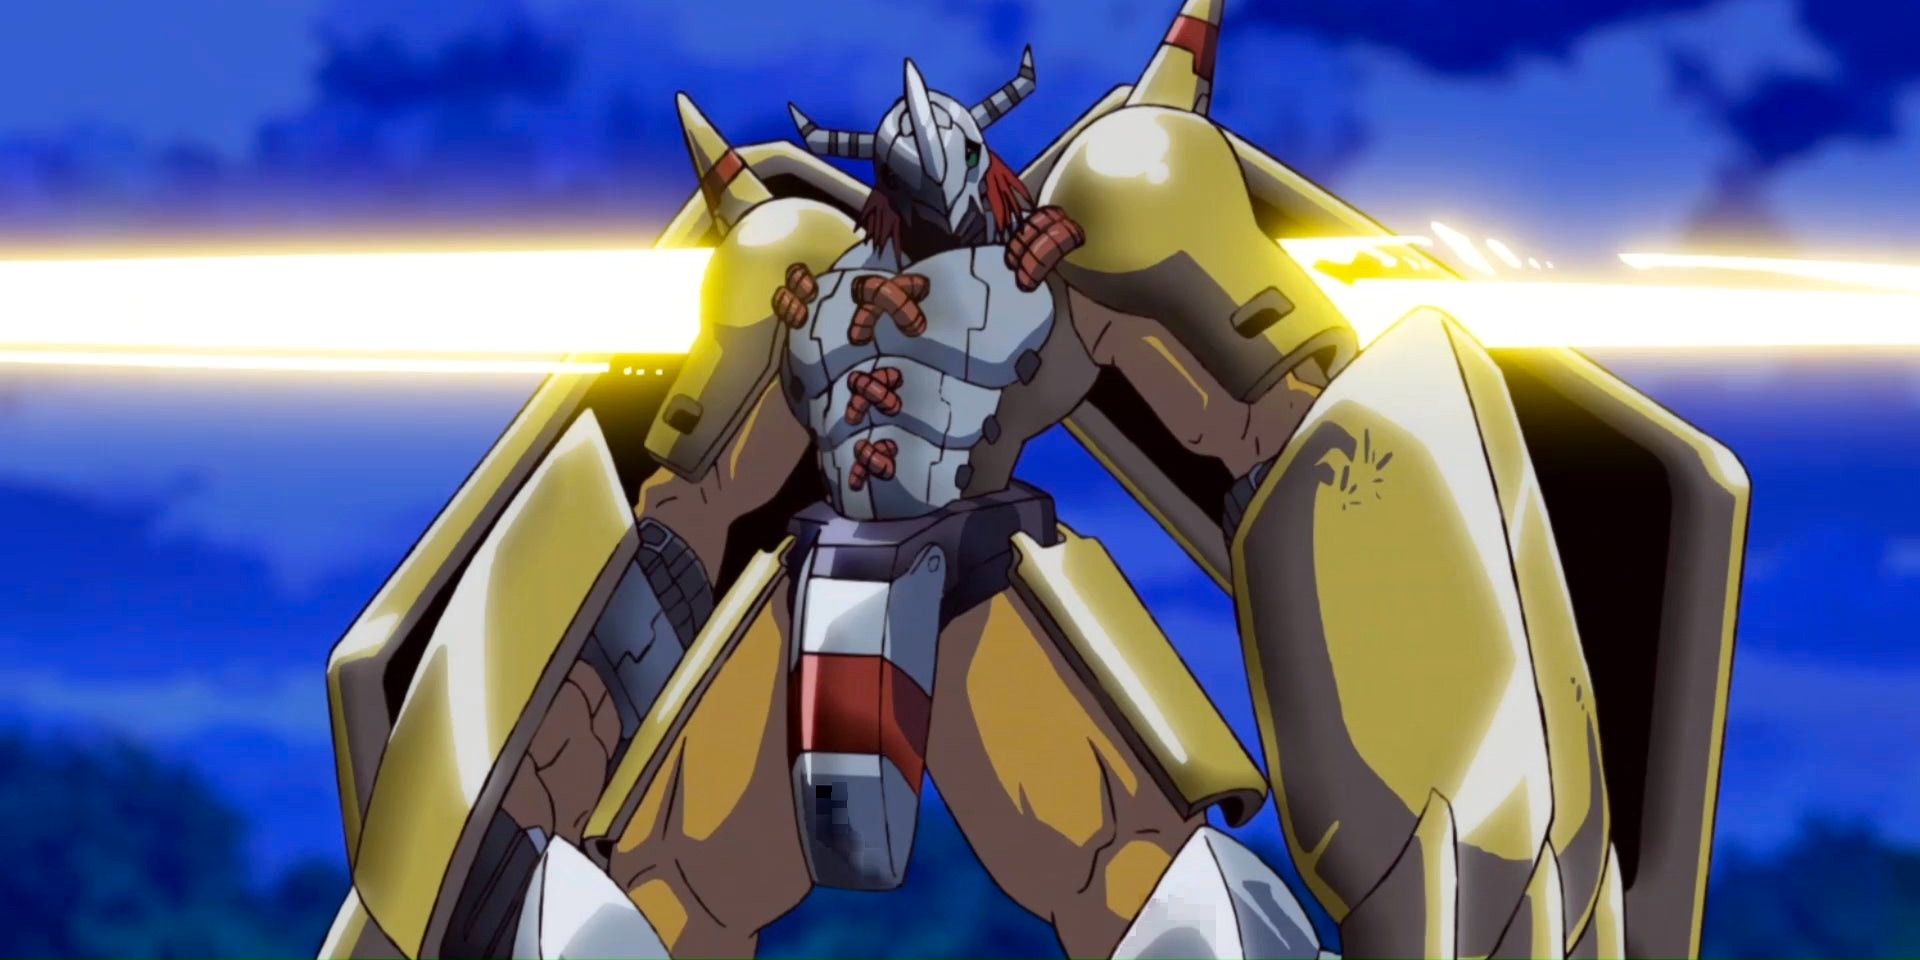 Digimon: WarGreymon's Return Raises an Overlooked Question About Sizes